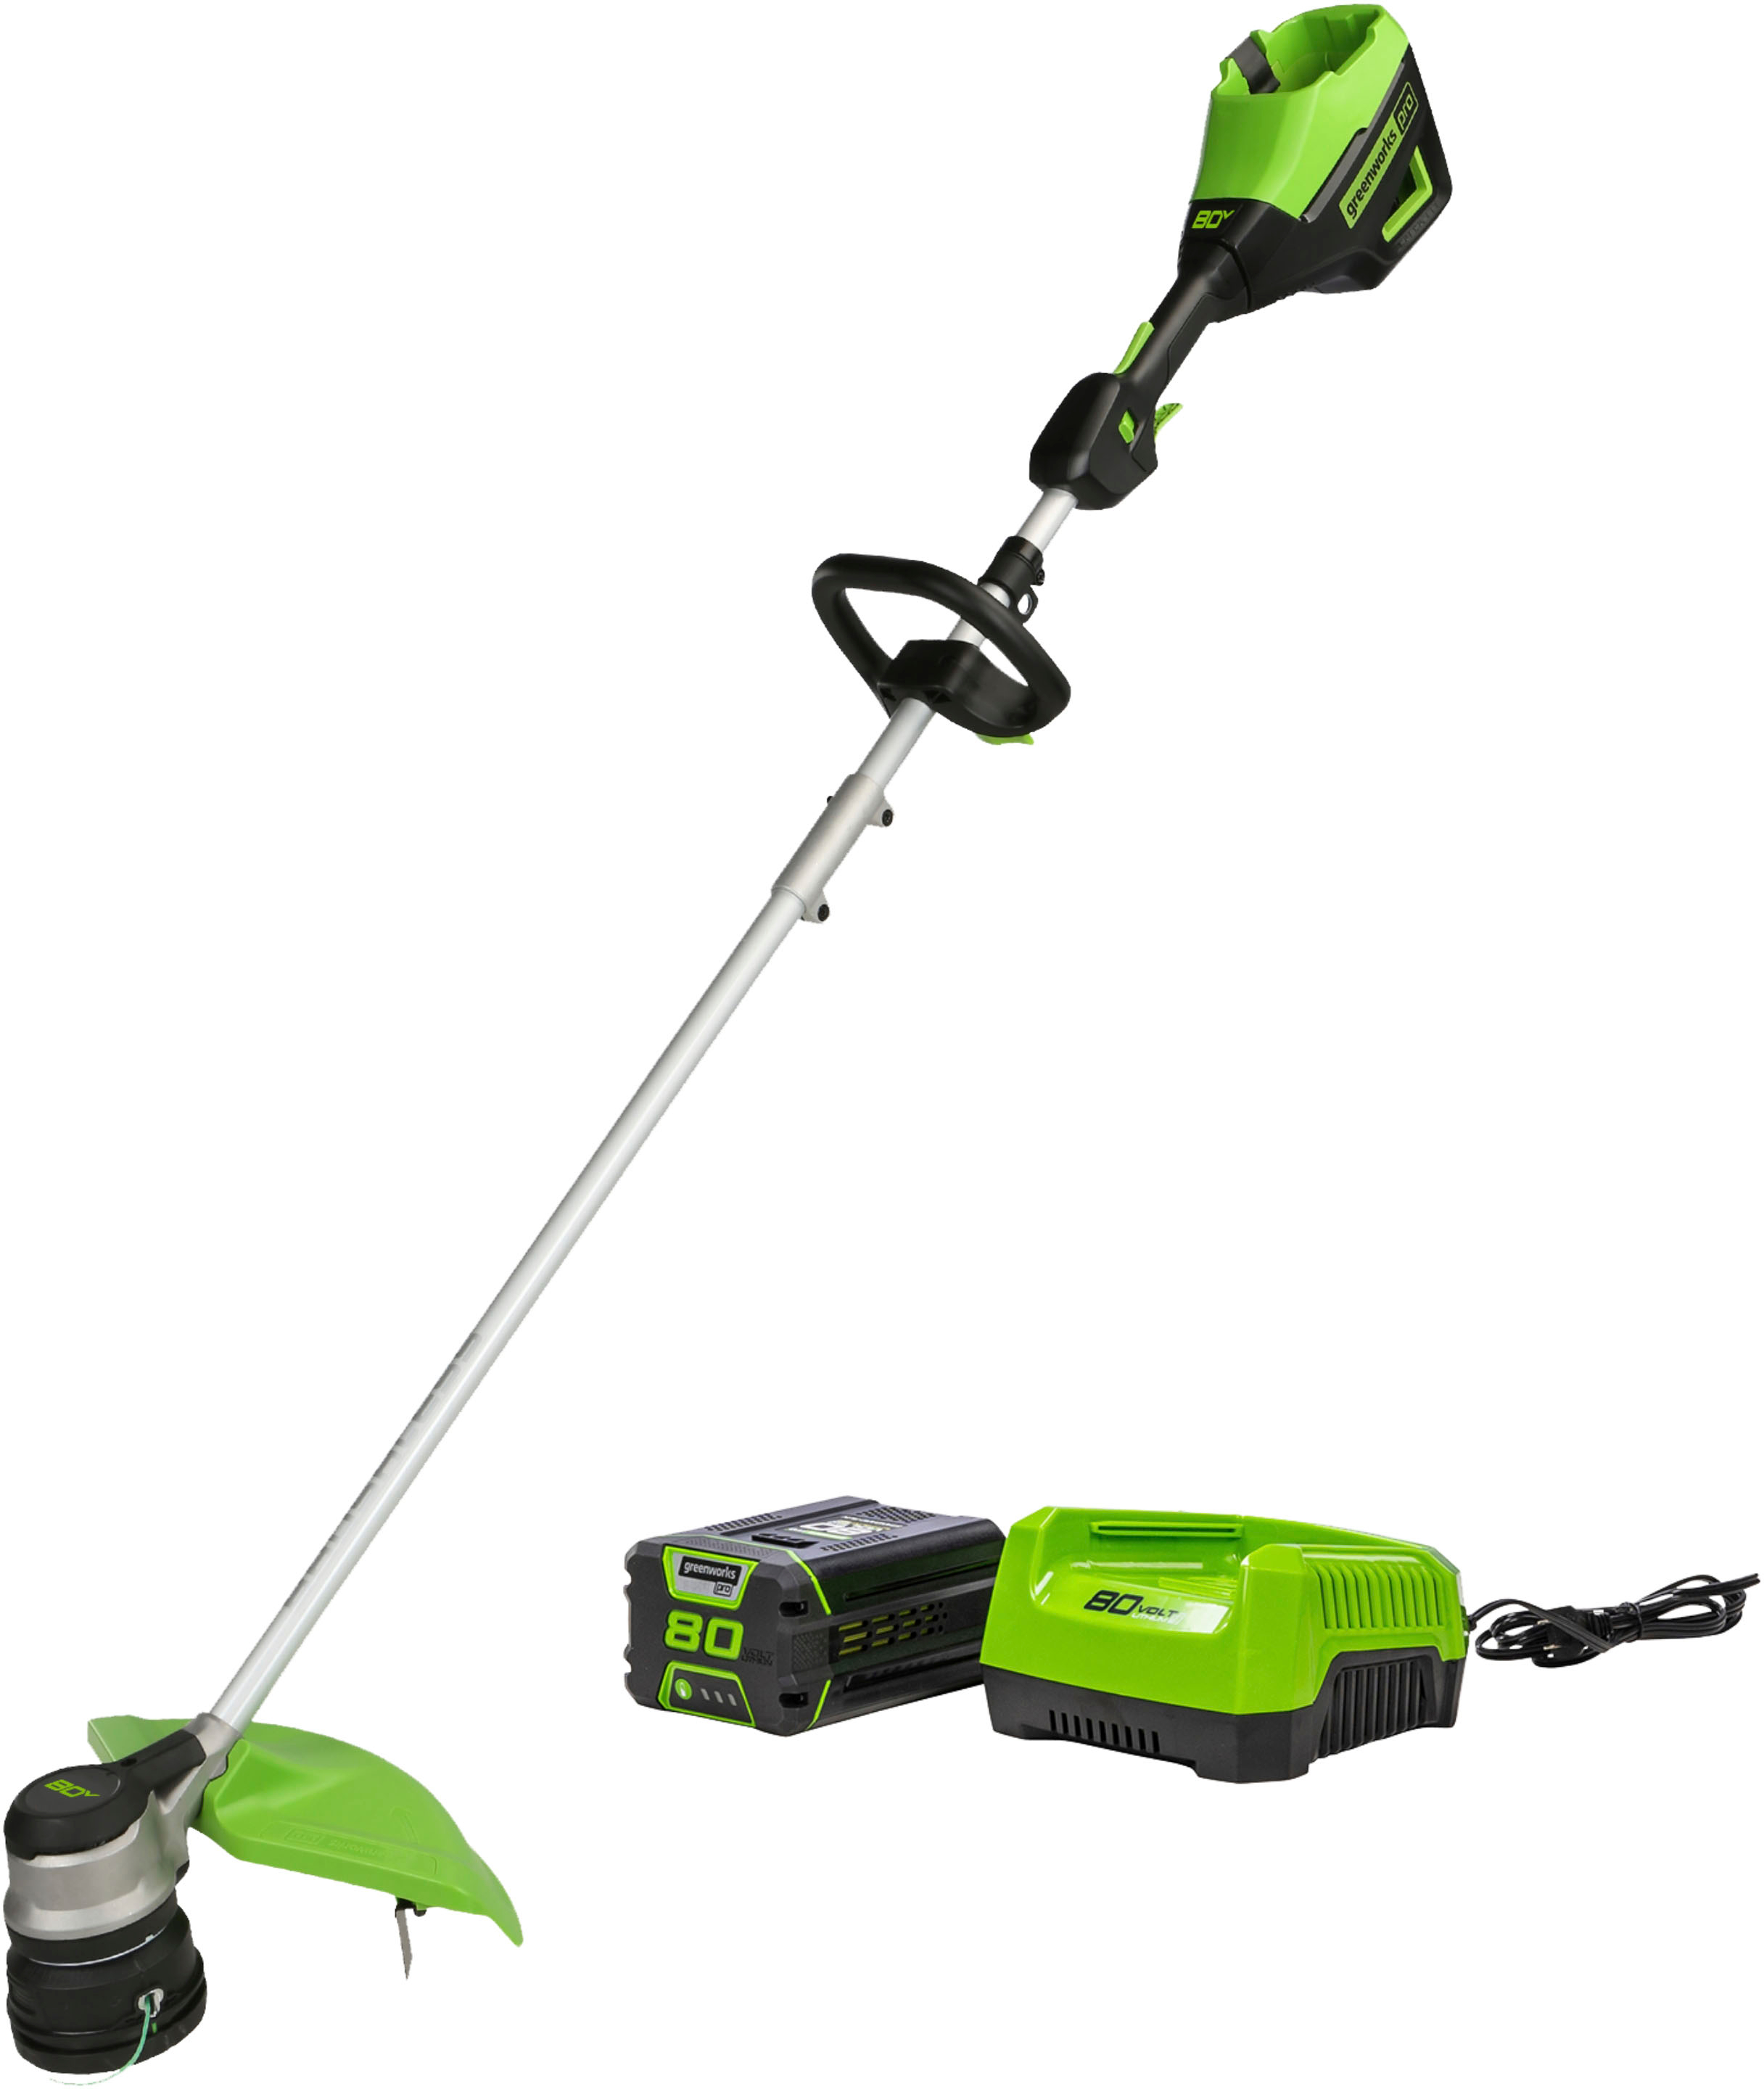 Greenworks 80 Volt 16-Inch Cutting Diameter Brushless Straight Shaft Grass Trimmer 2.0Ah Battery and x Charger) Green 2112302/ST80L211 - Best Buy